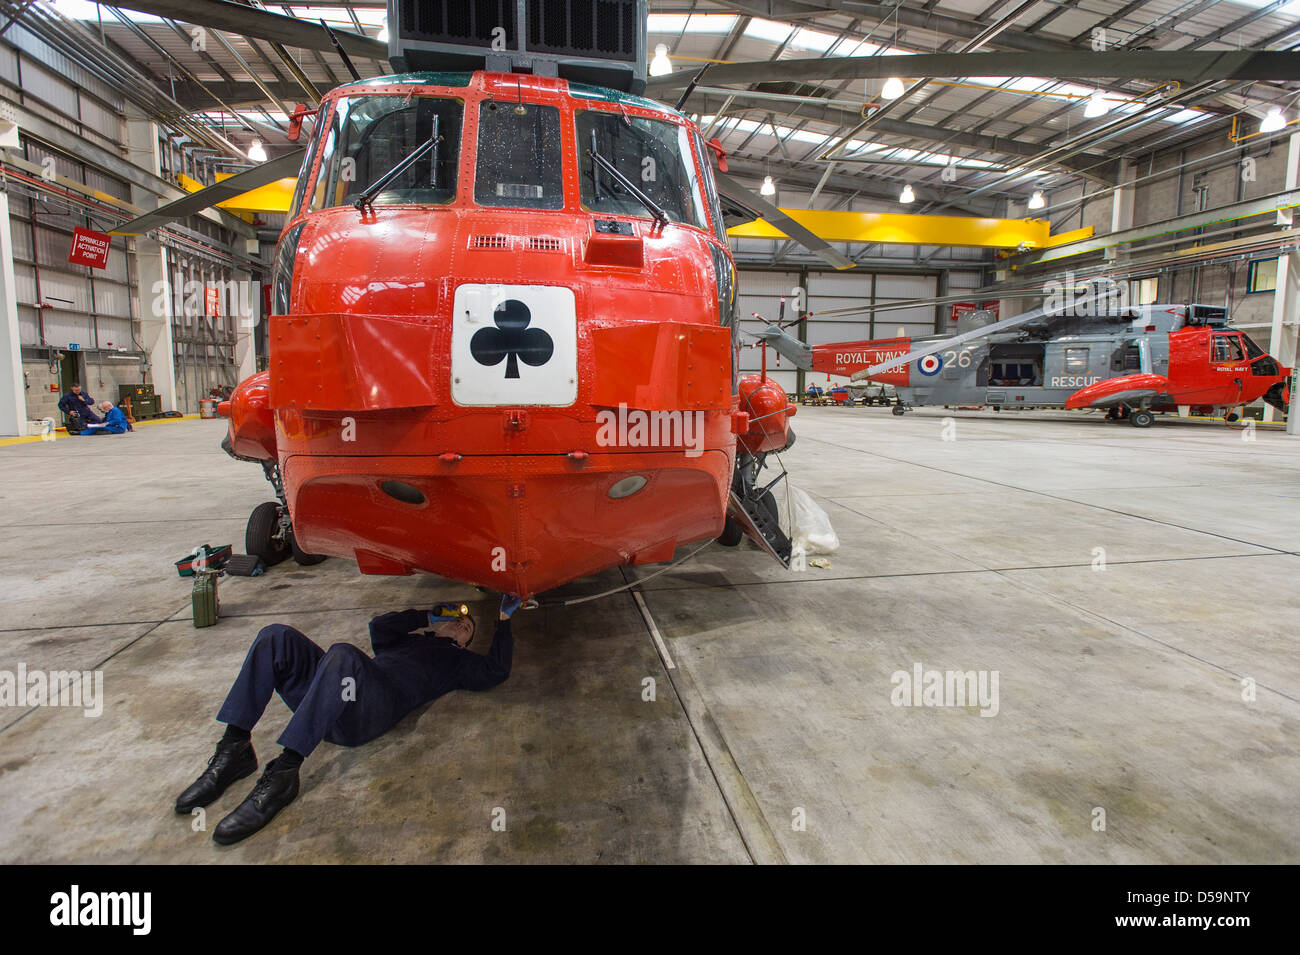 Sea King search and rescue helicopter pictured at RNAS Culdrose, in Cornwall, UK Stock Photo